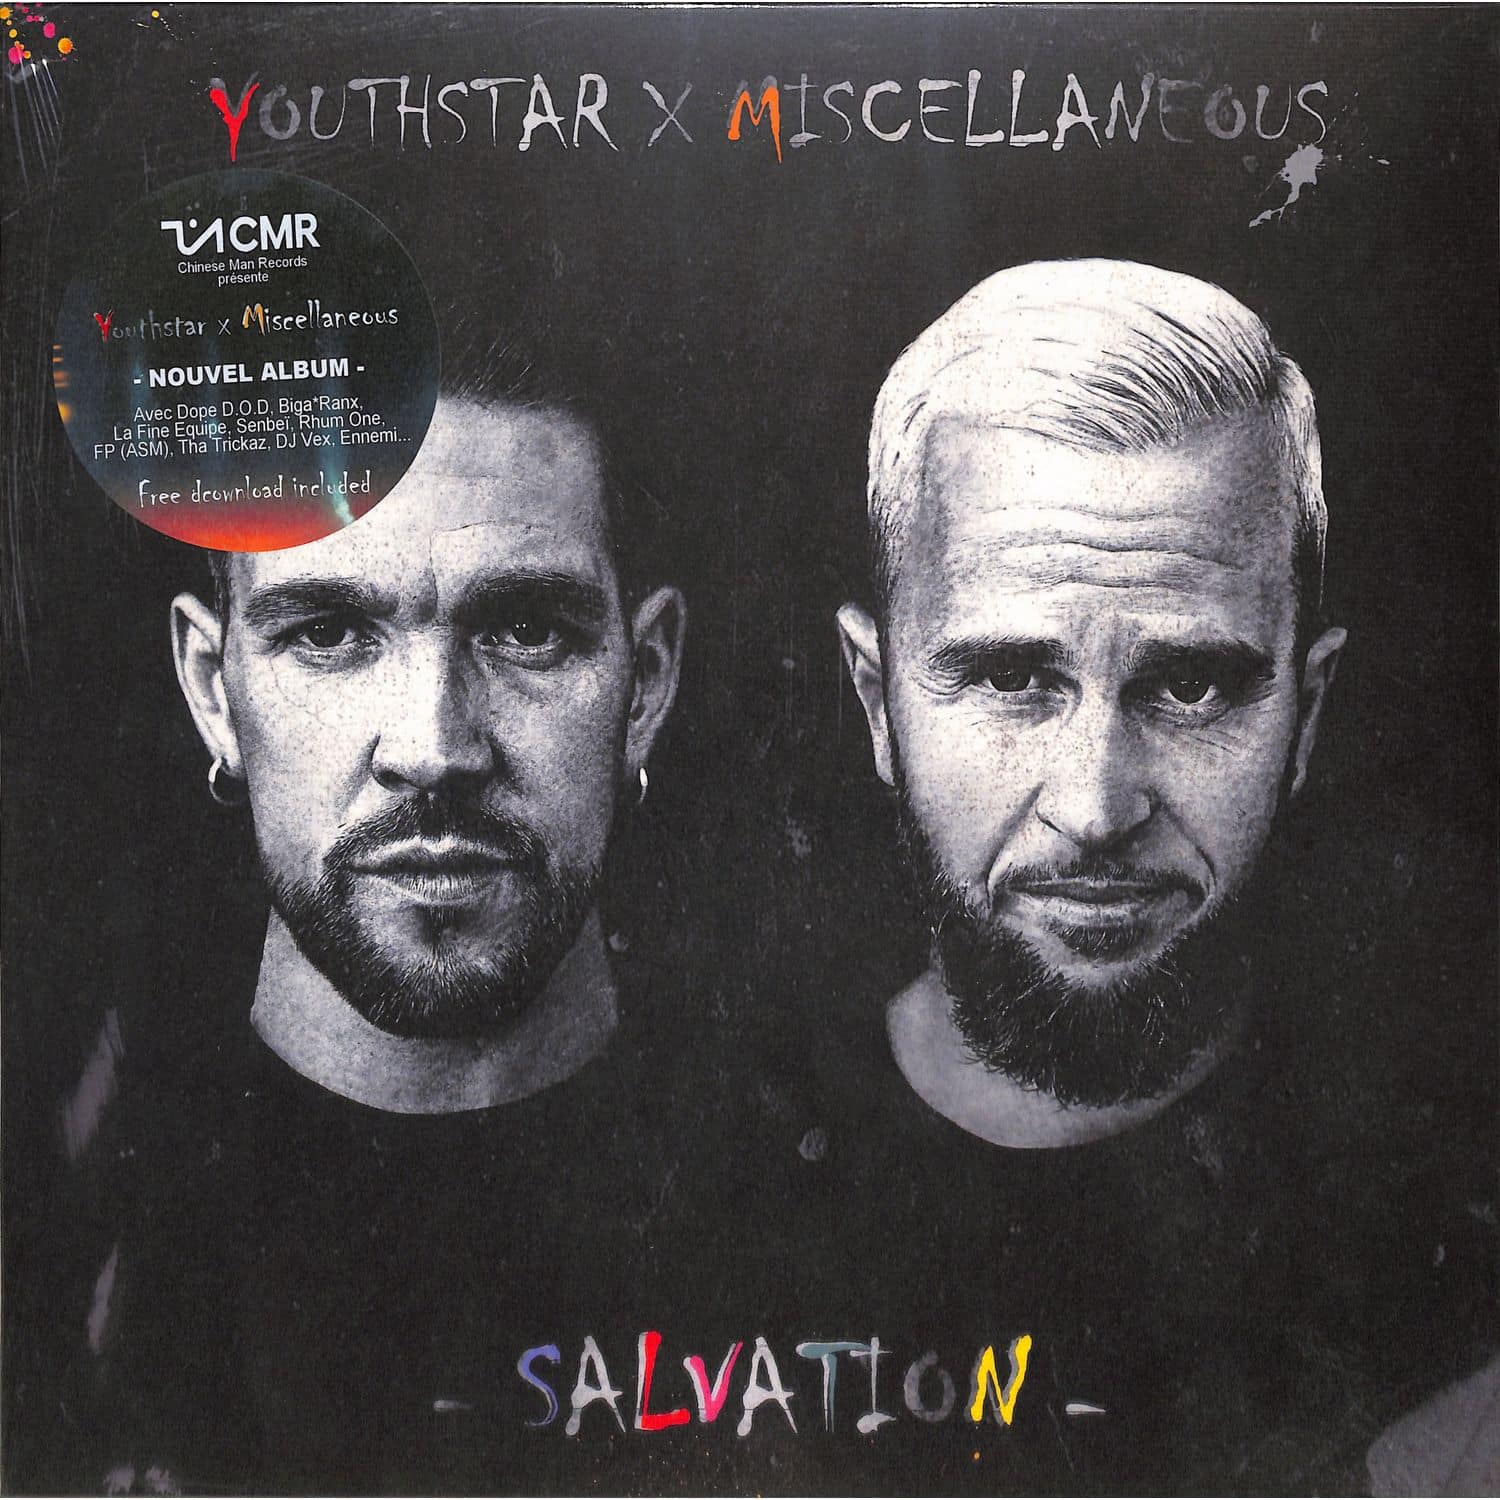 Youthstar & Miscellaneous - SALVATION 